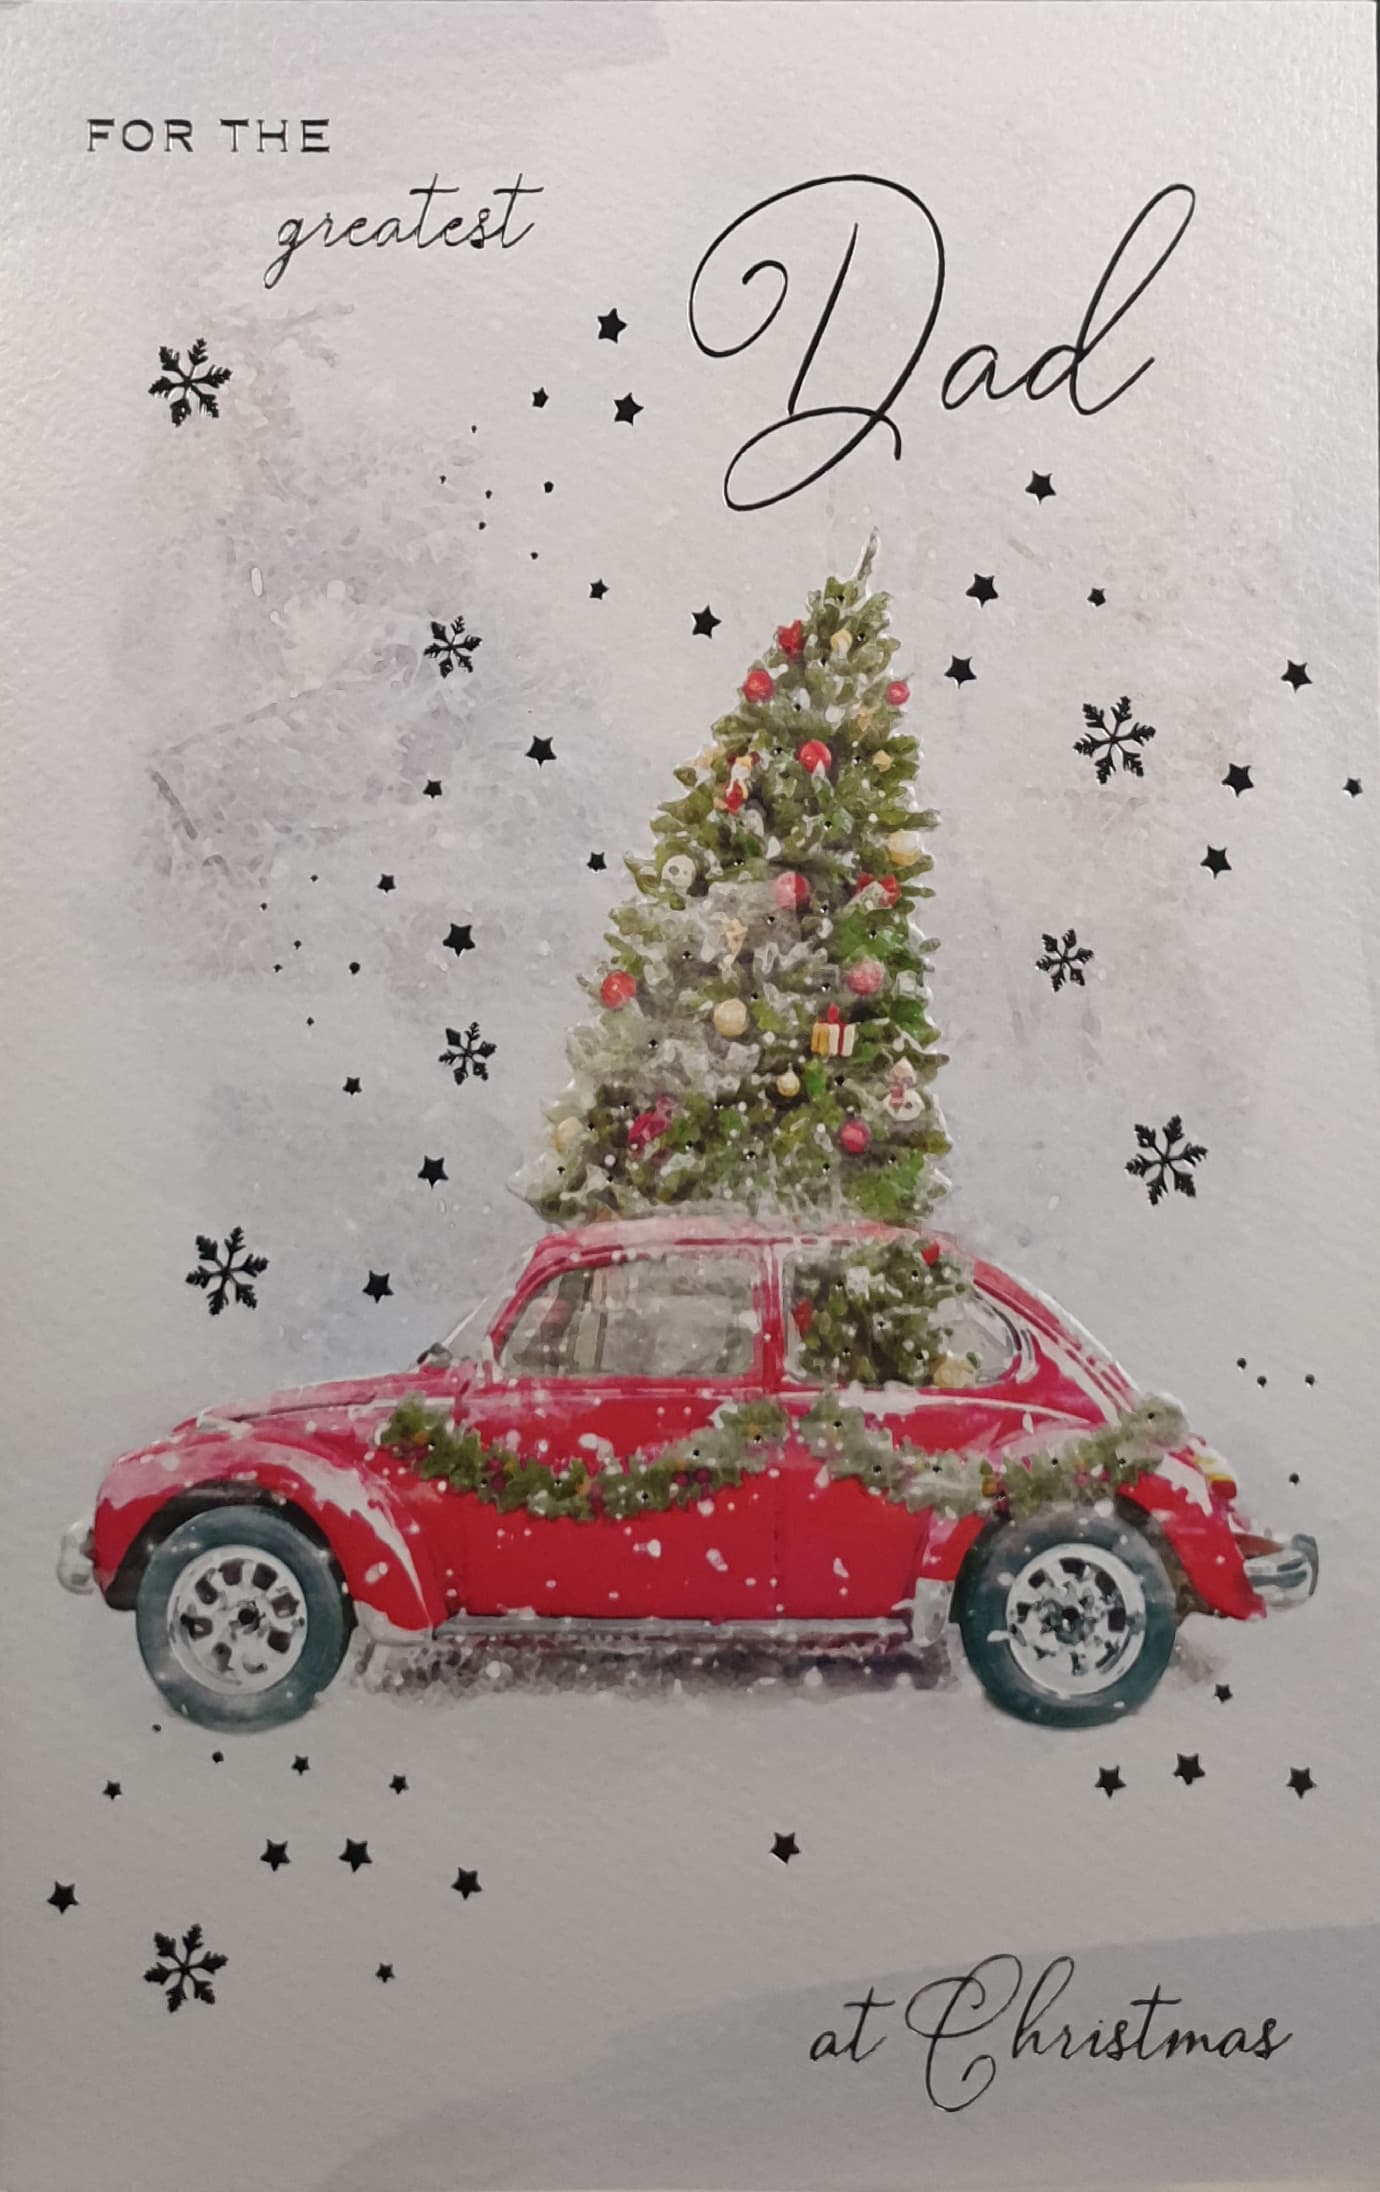 Dad Christmas Card - Red Car Carrying Christmas Tree